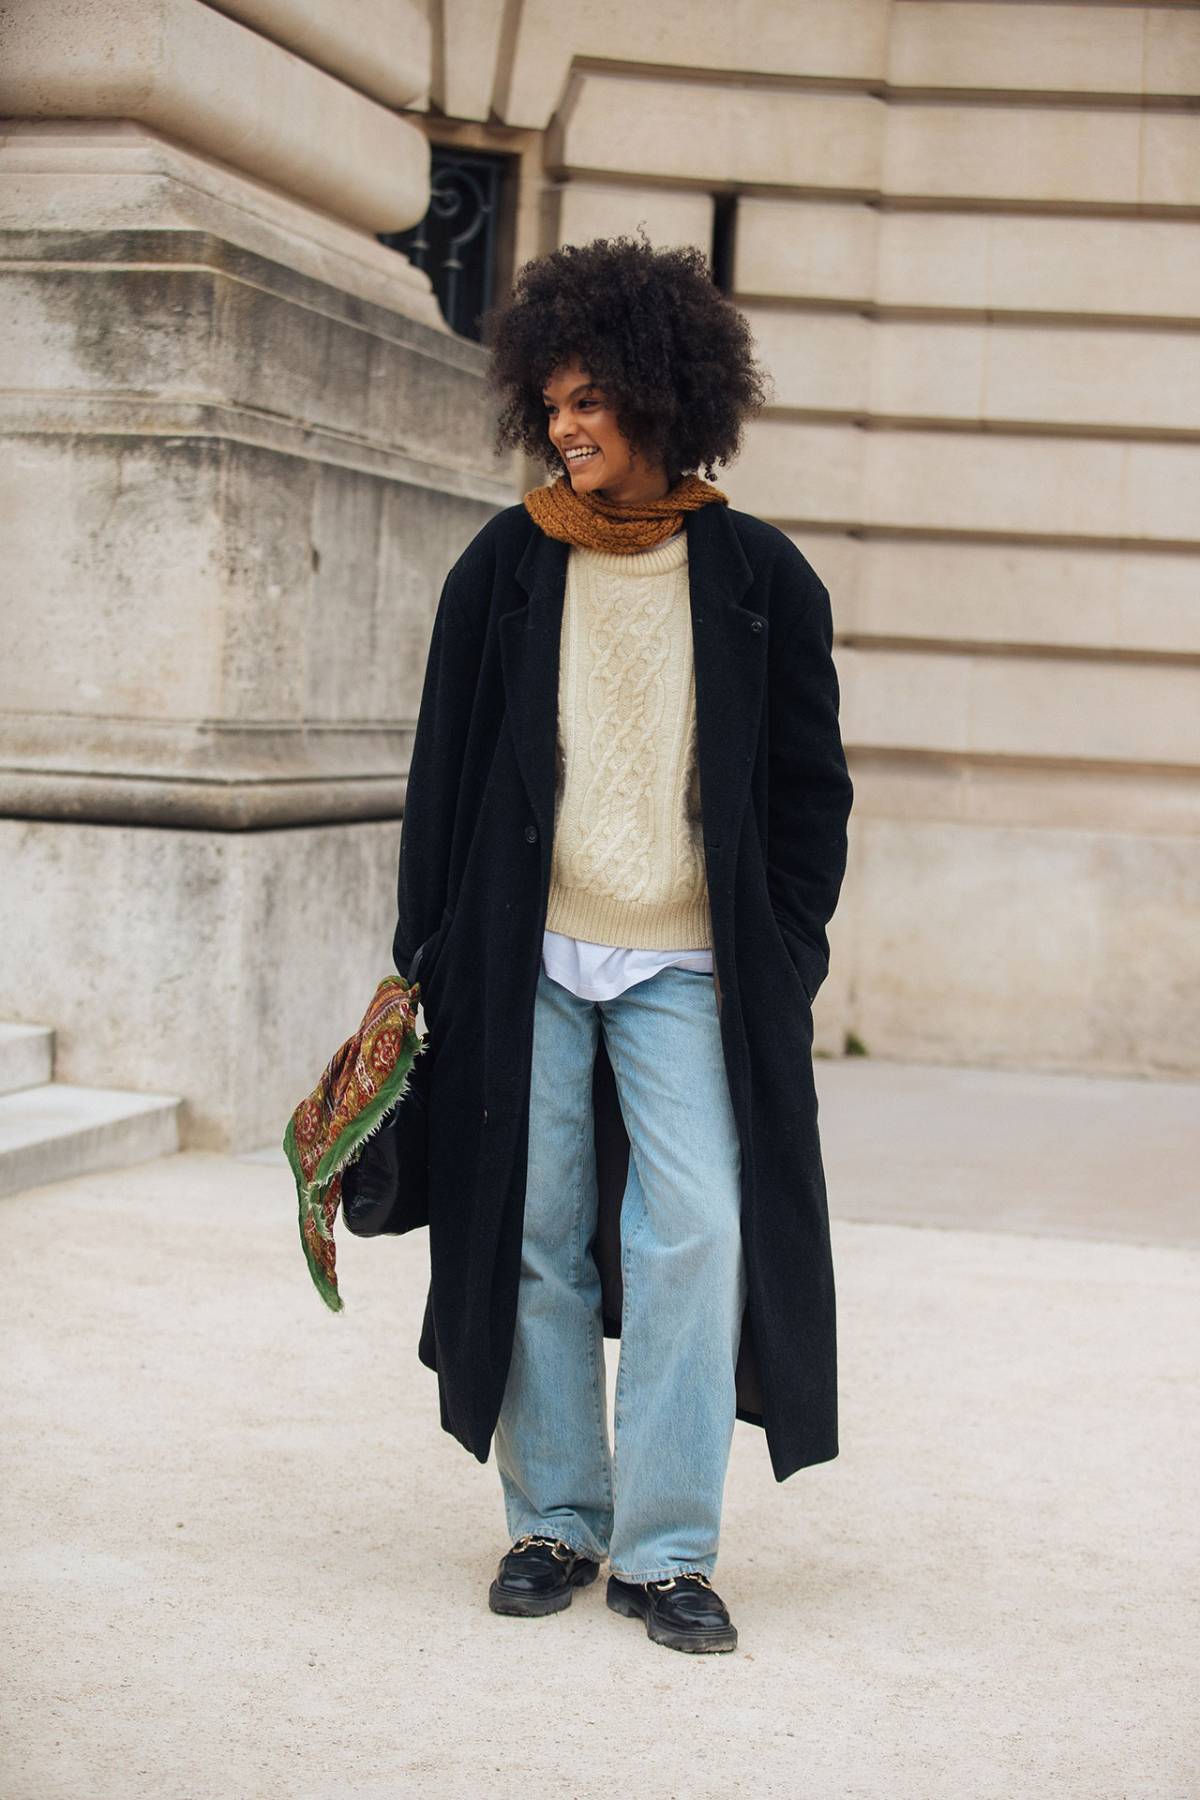 Farah Nieuwburg Blue 90s Jeans Neutral Cable Knit Sweater Off-Duty Model Outfit at Paris Fashion Week Fall-Winter 2023